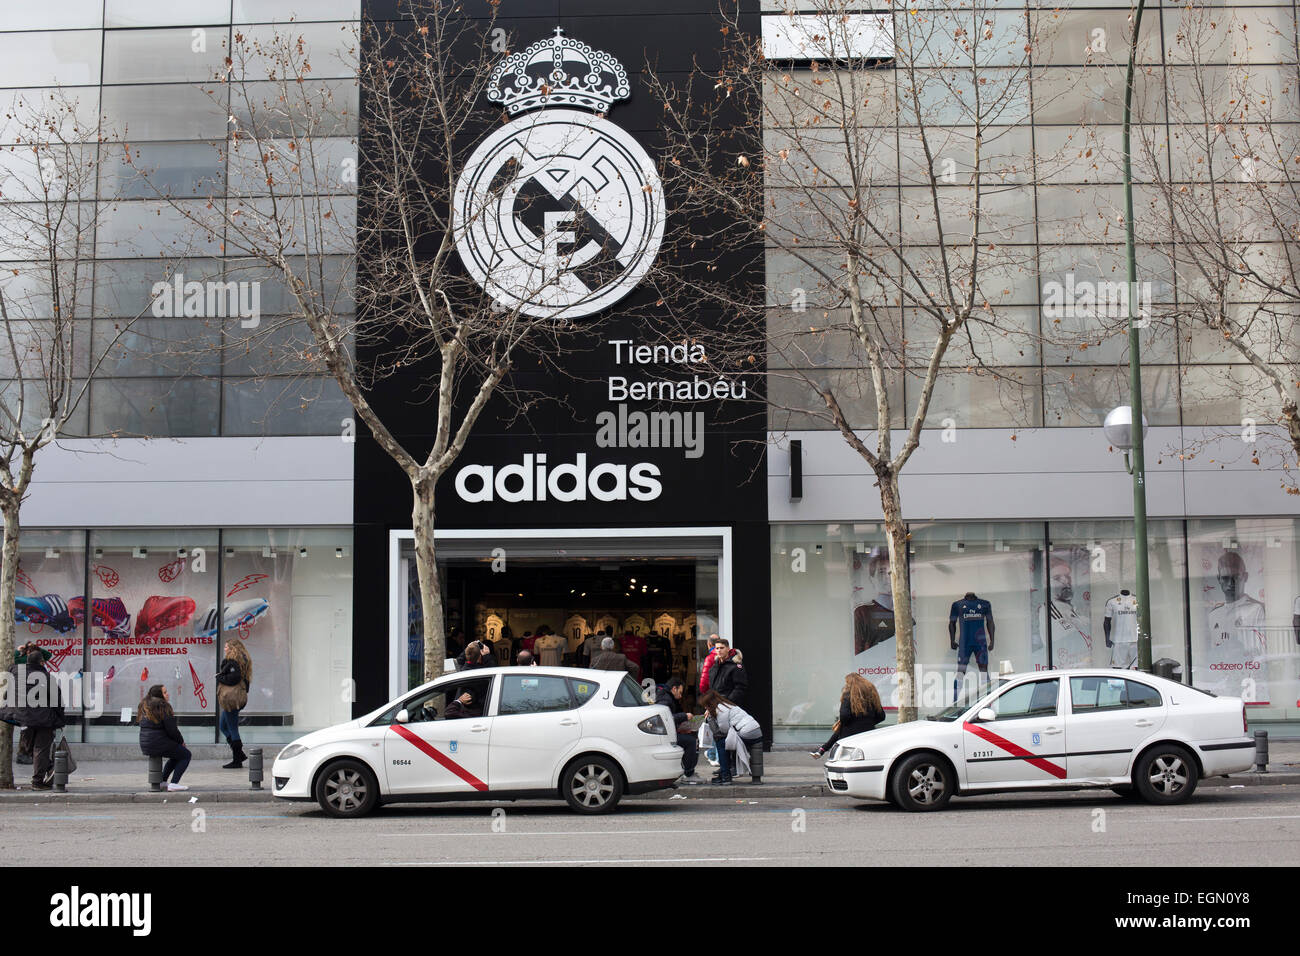 Real madrid shop hi-res stock photography and images - Alamy